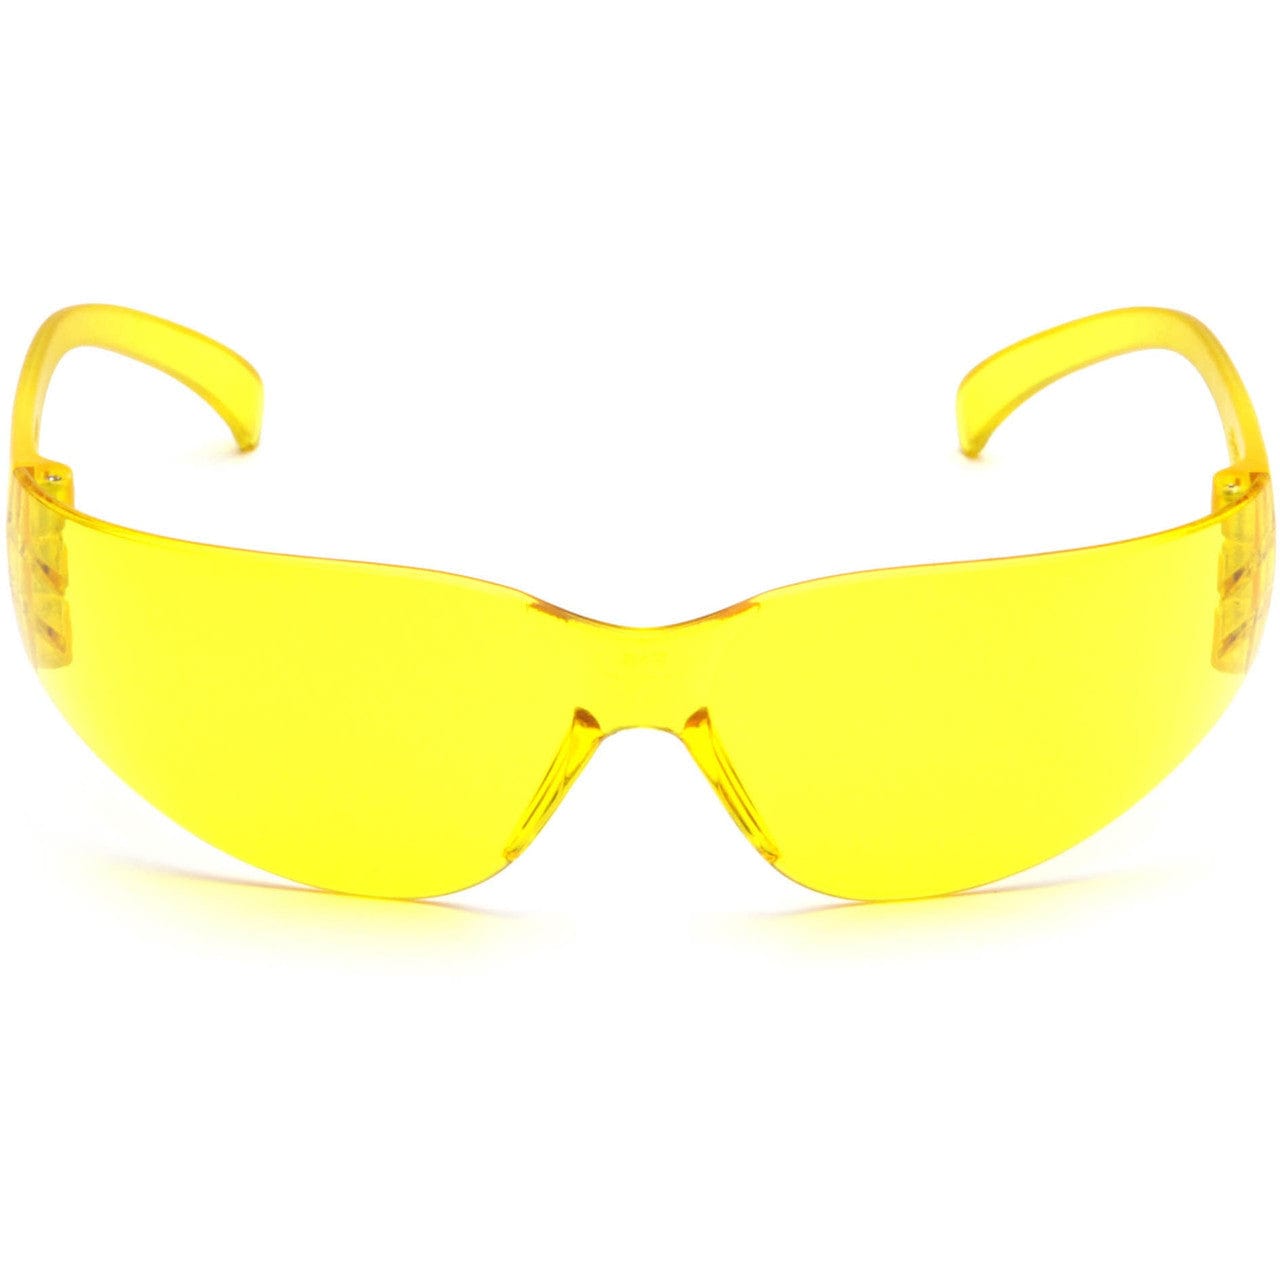 Pyramex Intruder Safety Glasses with Amber Lens S4130S Front View